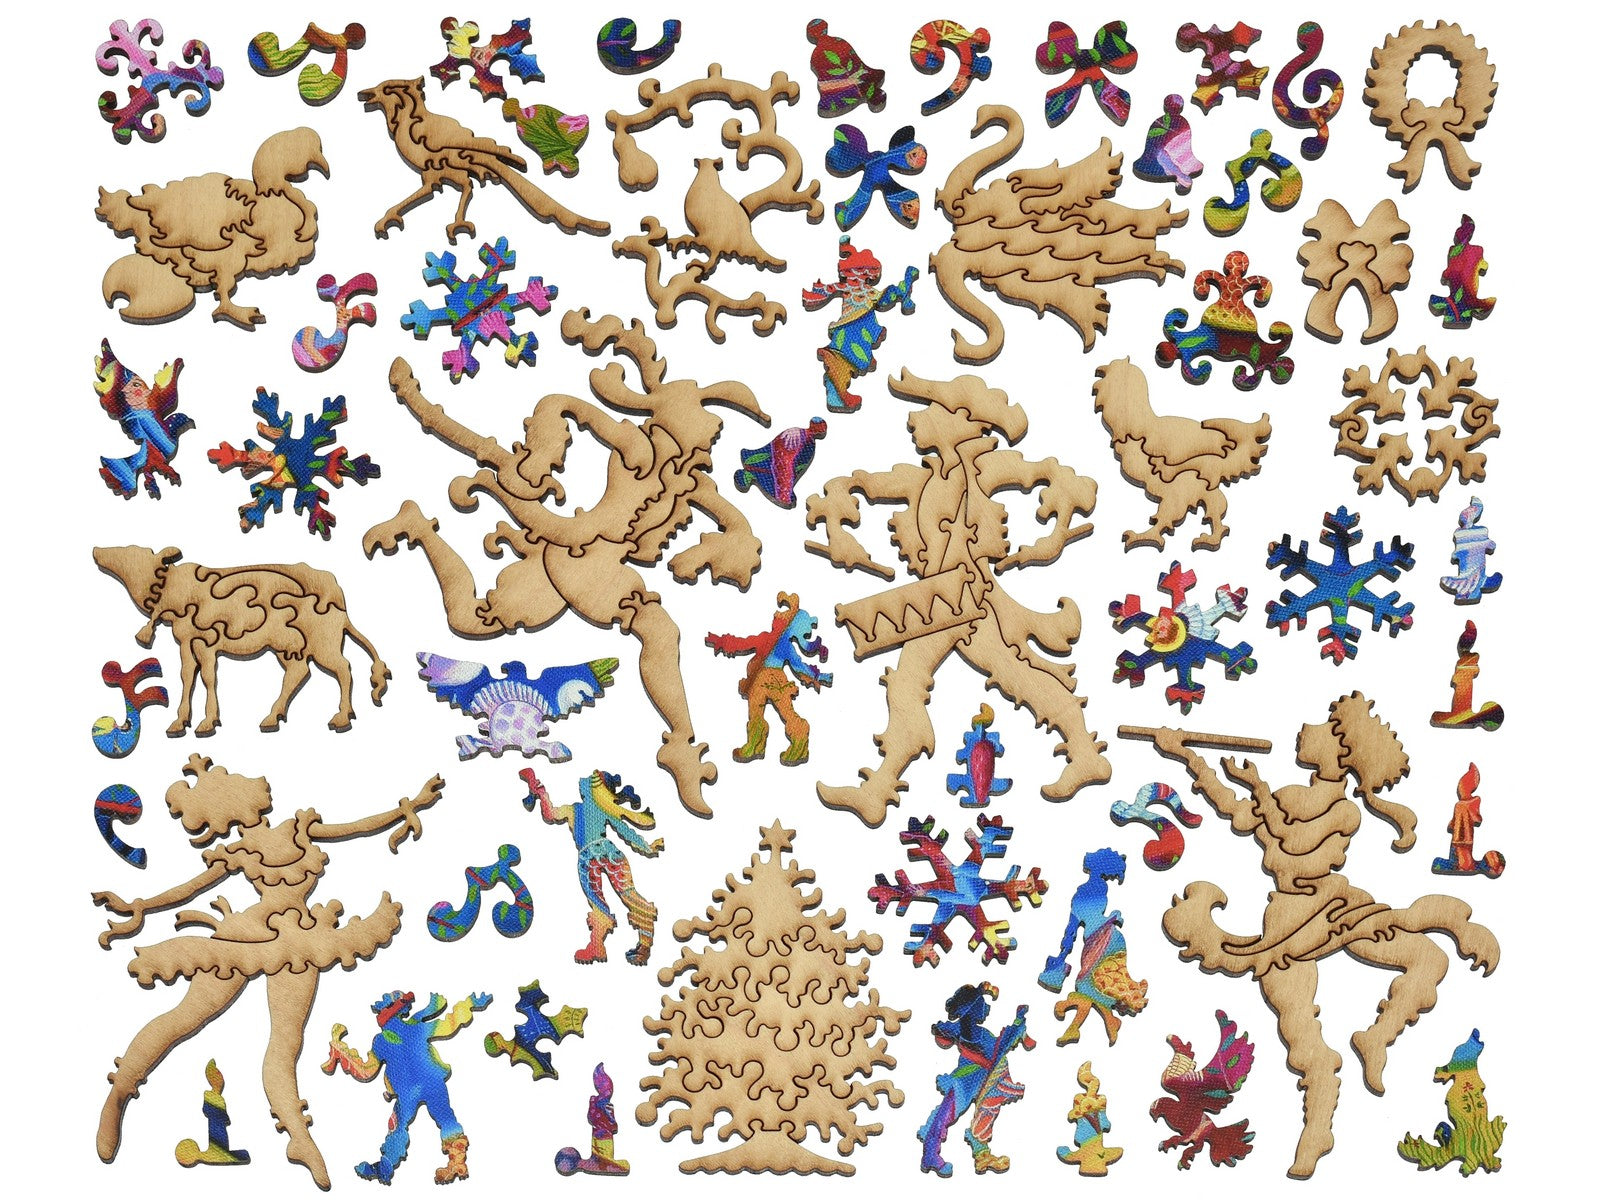 The whimsies that can be found in the puzzle, The Twelve Days of Christmas.